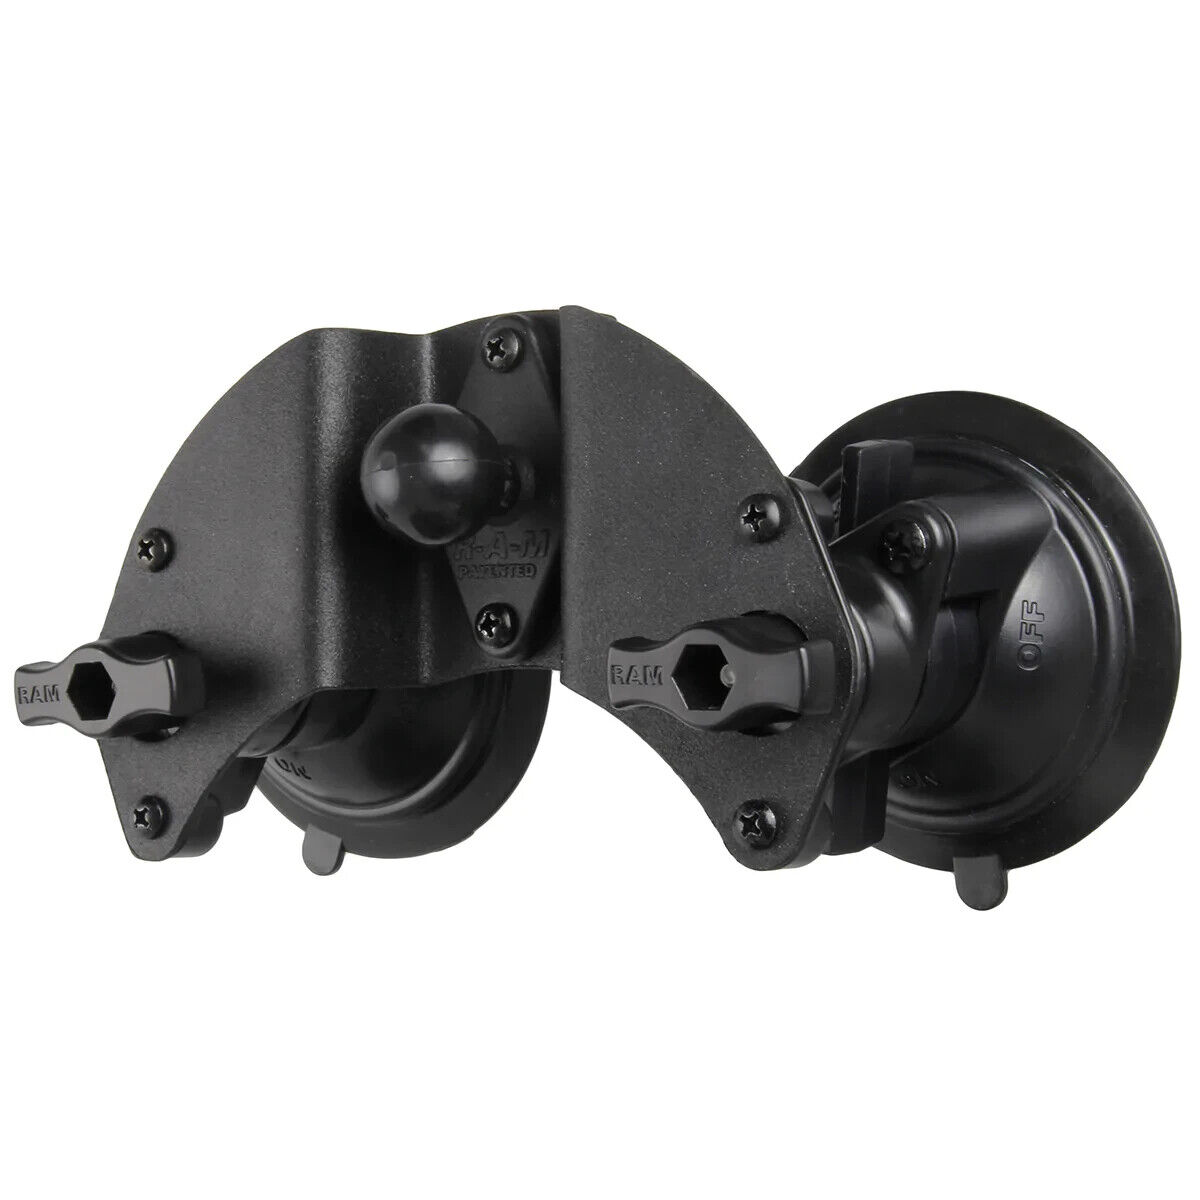 RAM Mount Double Articulating Suction Mount Base with 1